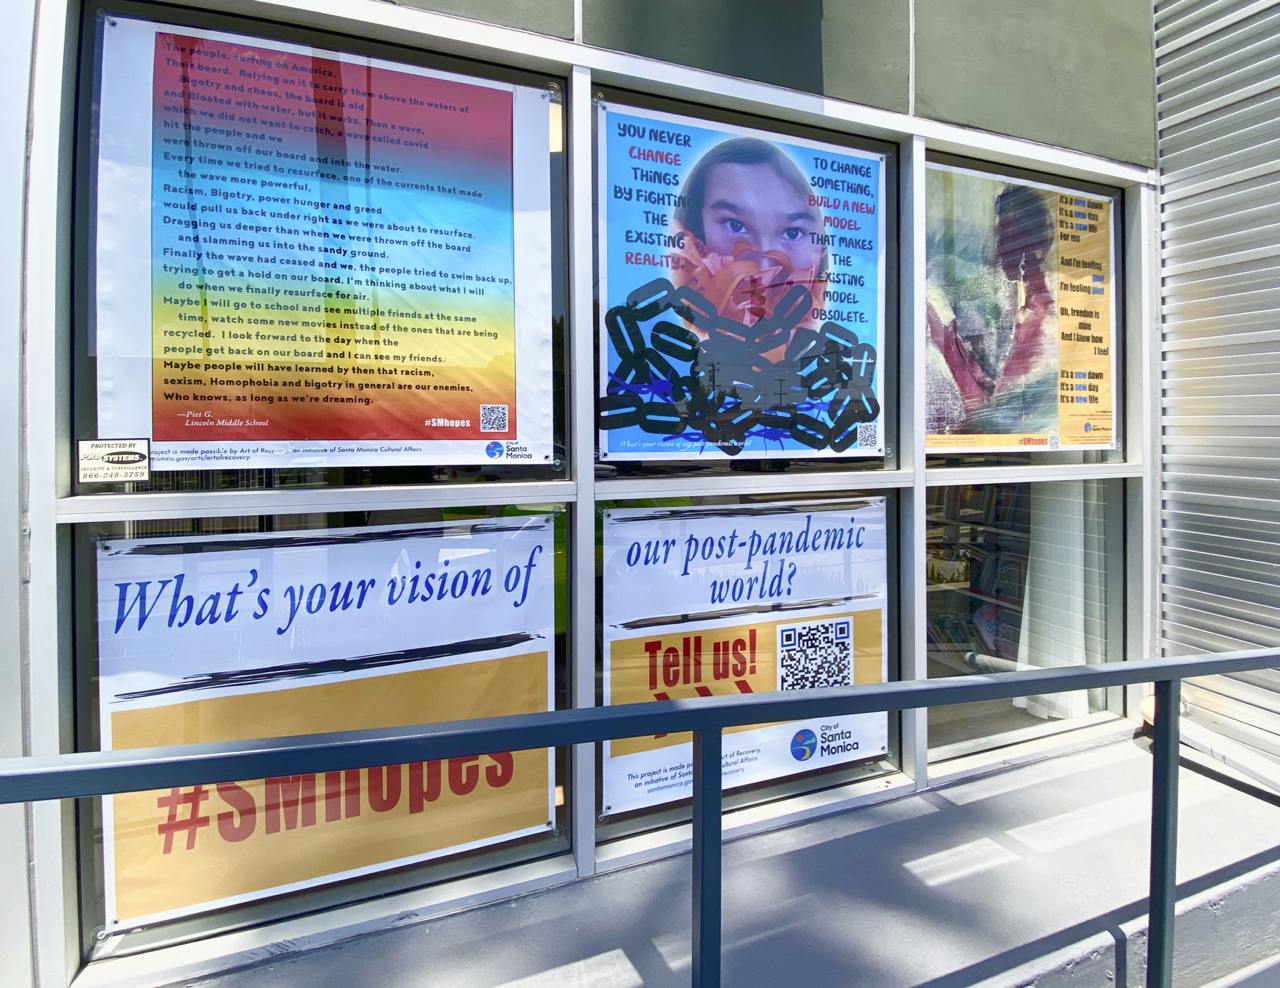 Photograph of Paula Goldman's Archive of Hopes and Dreams installed on banners in Downtown Santa Monica